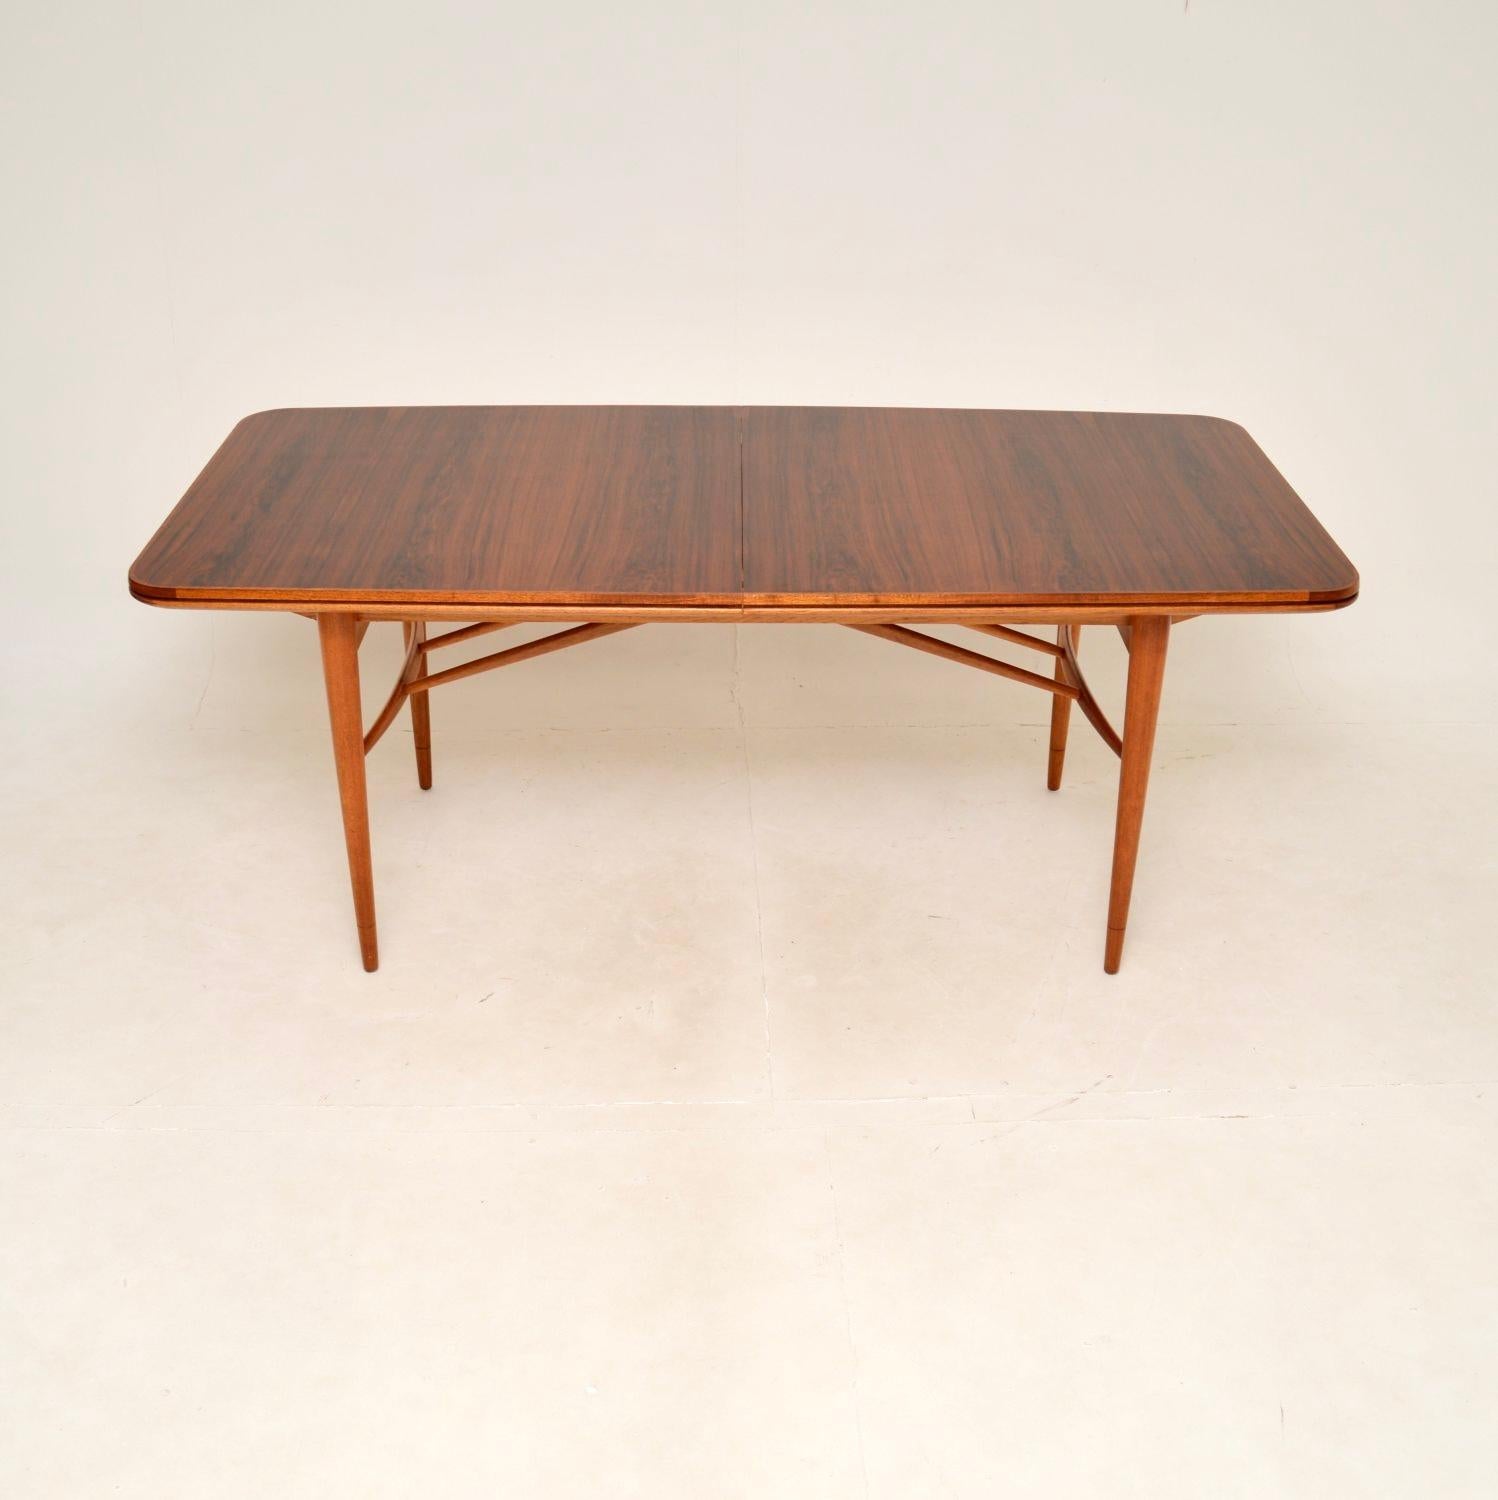 A fantastic vintage dining table by Robert Heritage for Archie Shine. This is the ‘Hamilton’ dining table, made in England and dates from the 1960’s.

This is of superb quality, with a beautiful top and solid base. The colour tone and grain patterns